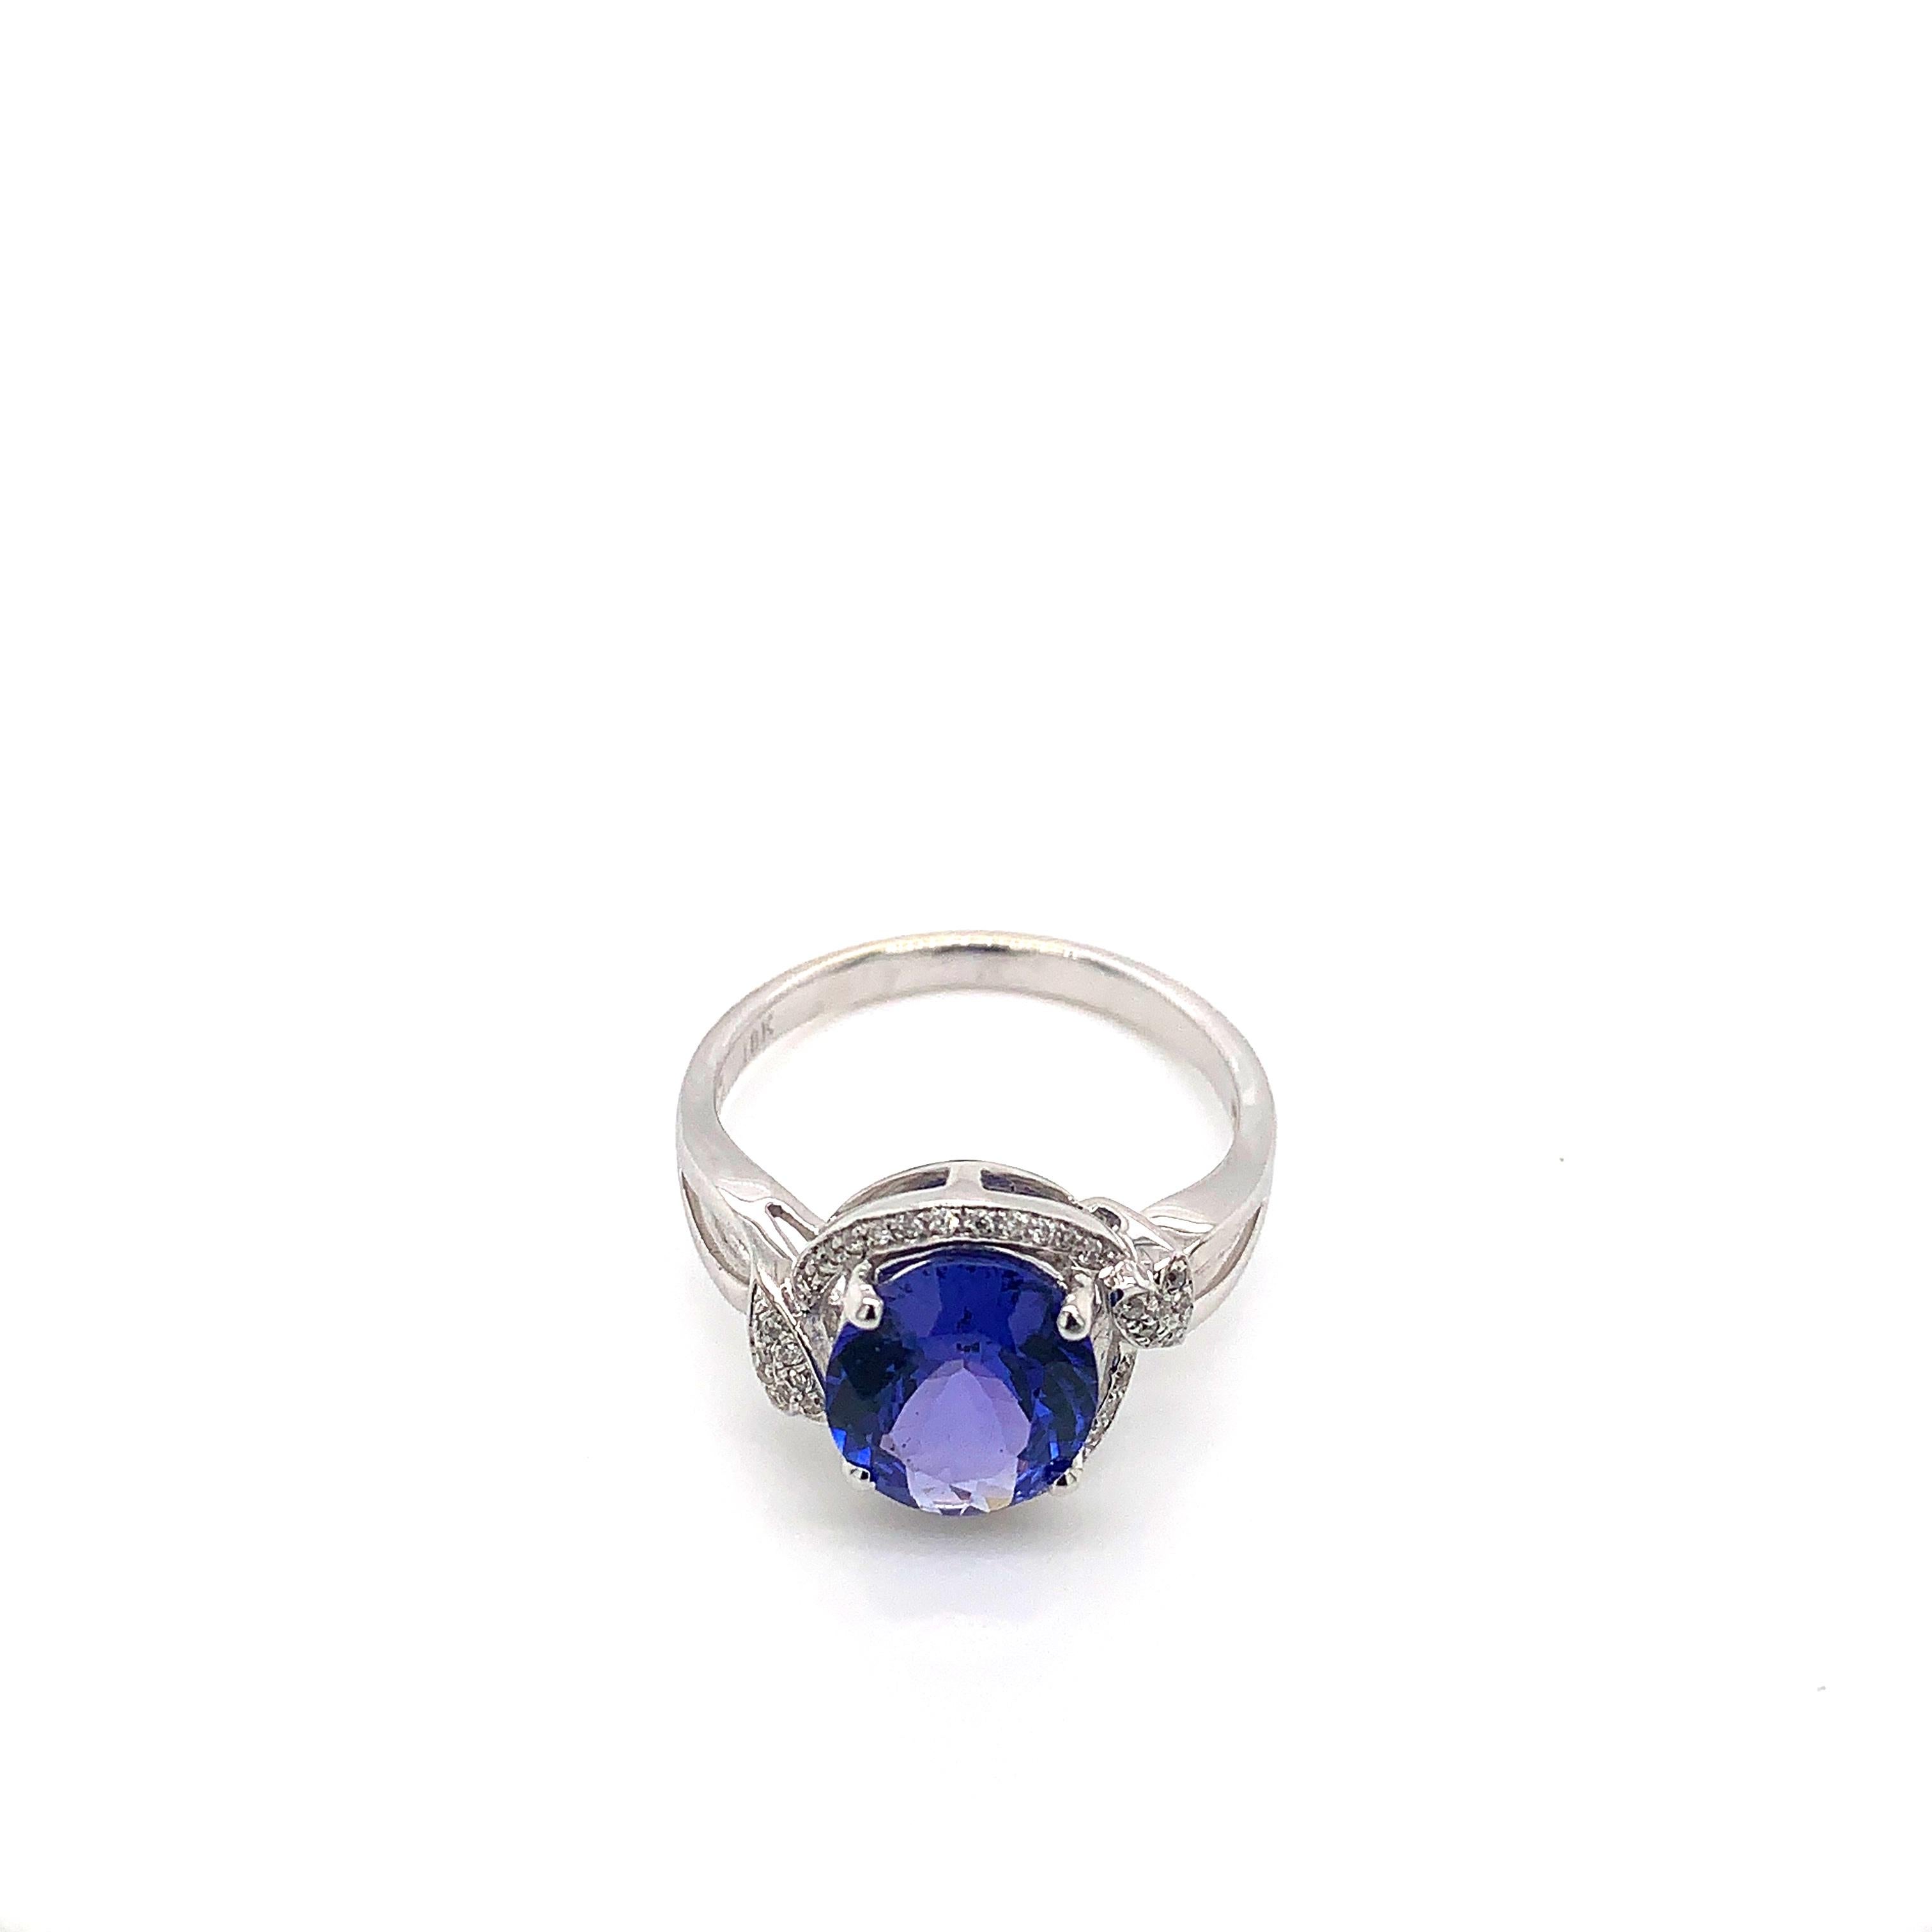 Classic tanzanite ring in 18K white gold with diamonds. 

Tanzanite: 2.270 carat oval shape.
Diamonds: 0.13 carat, G colour, VS clarity. 
Gold: 3.52g, 18K white gold. 